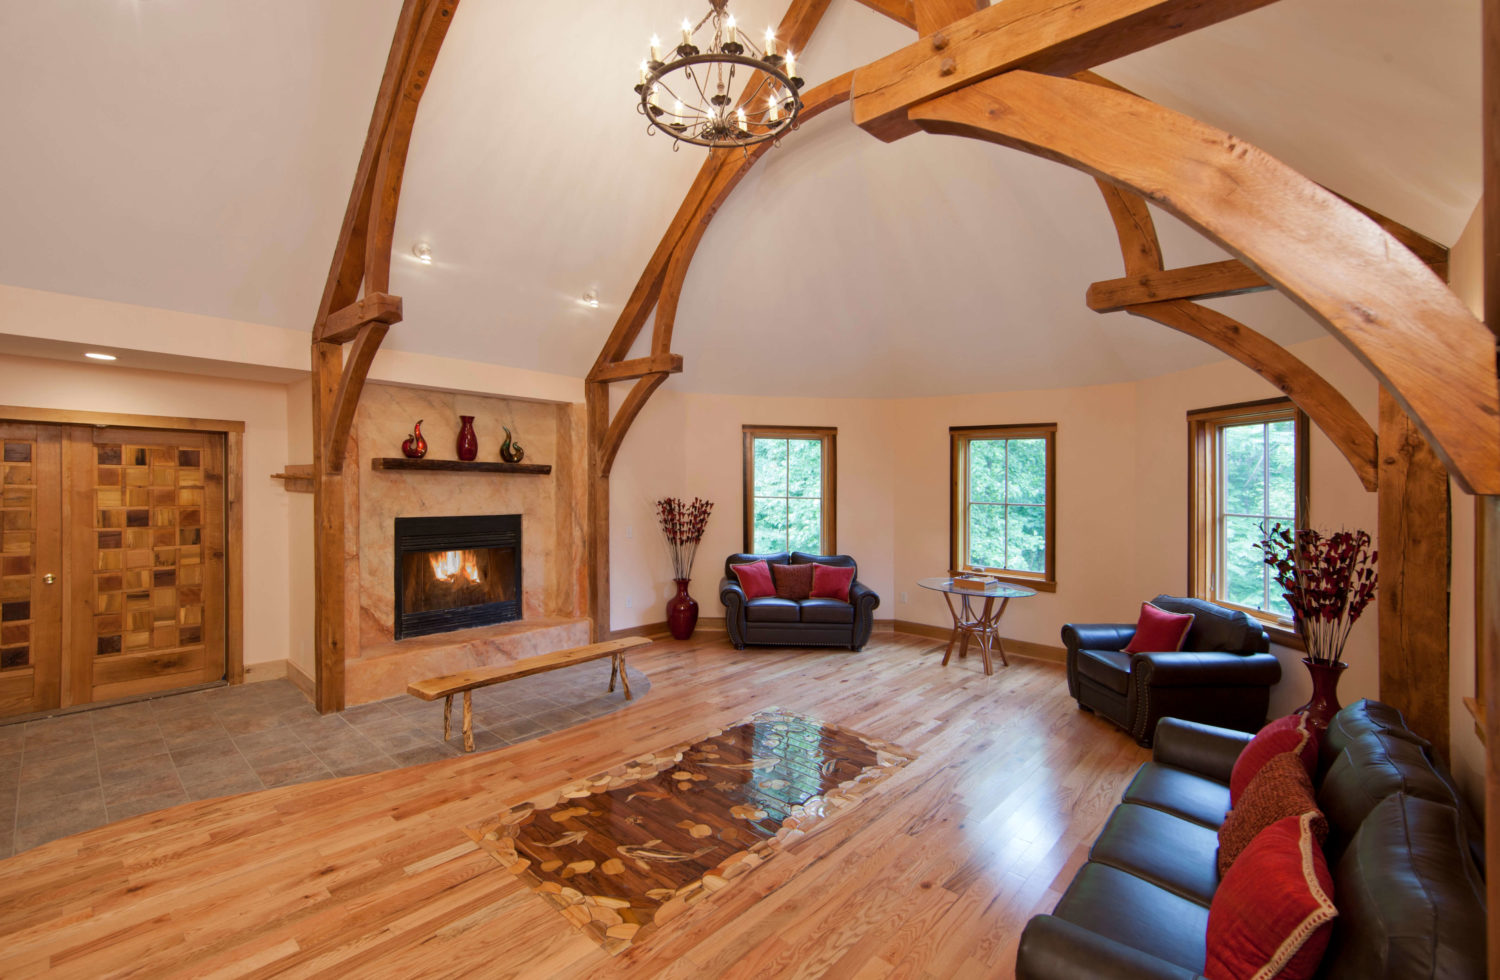 lobby with fireplace and arching wooden beams and several dark browncouches with red throw pillows surround the room